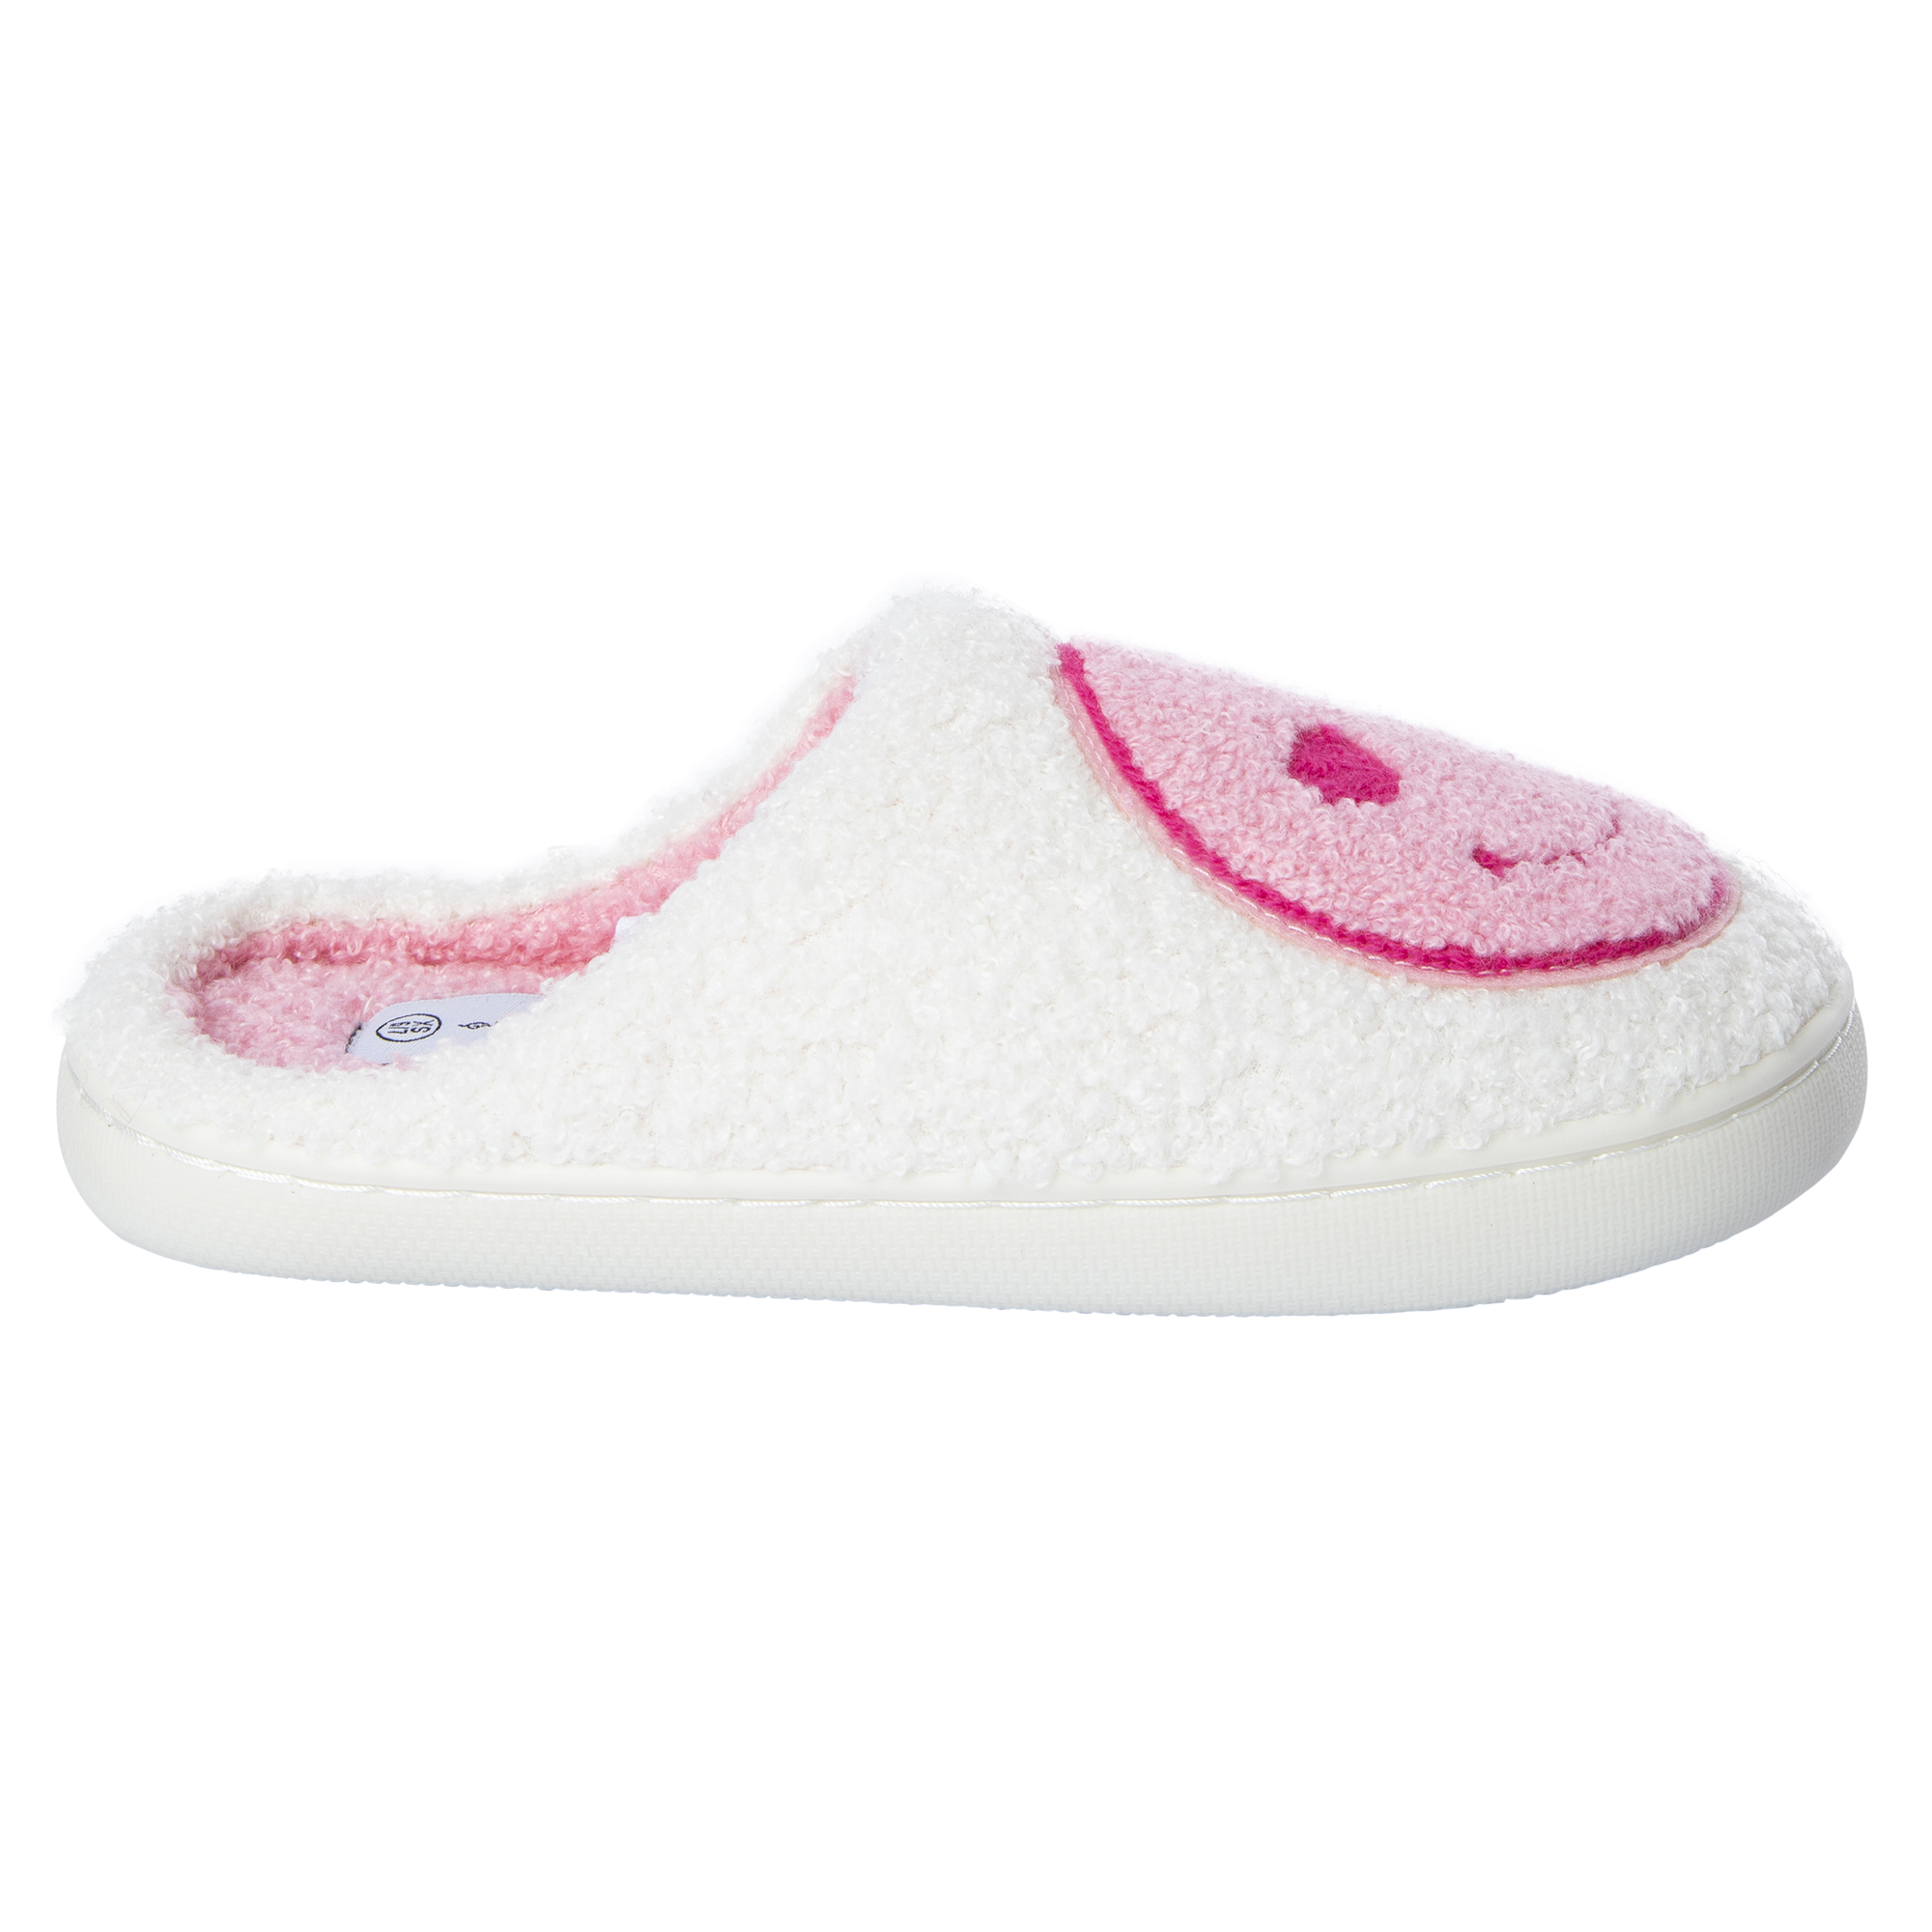 These Target Teddy Slippers Are Selling Out Fast